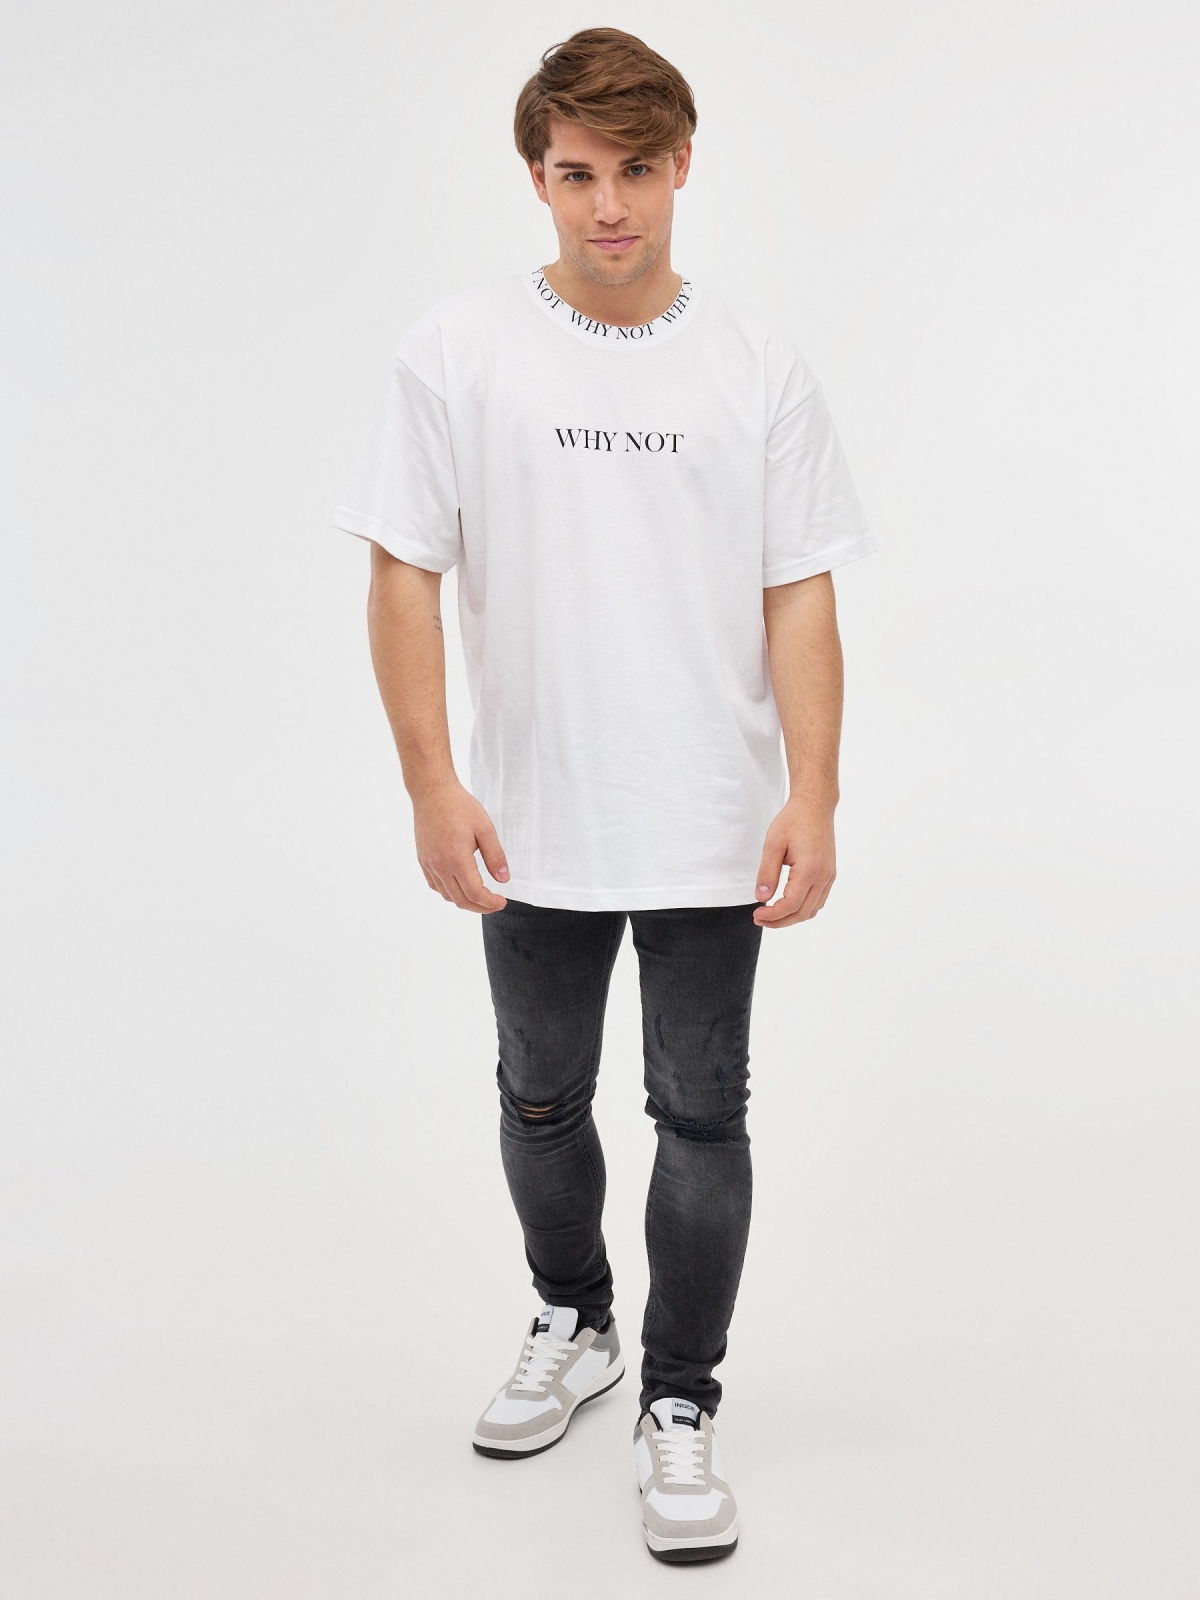 Why Not T-shirt white front view